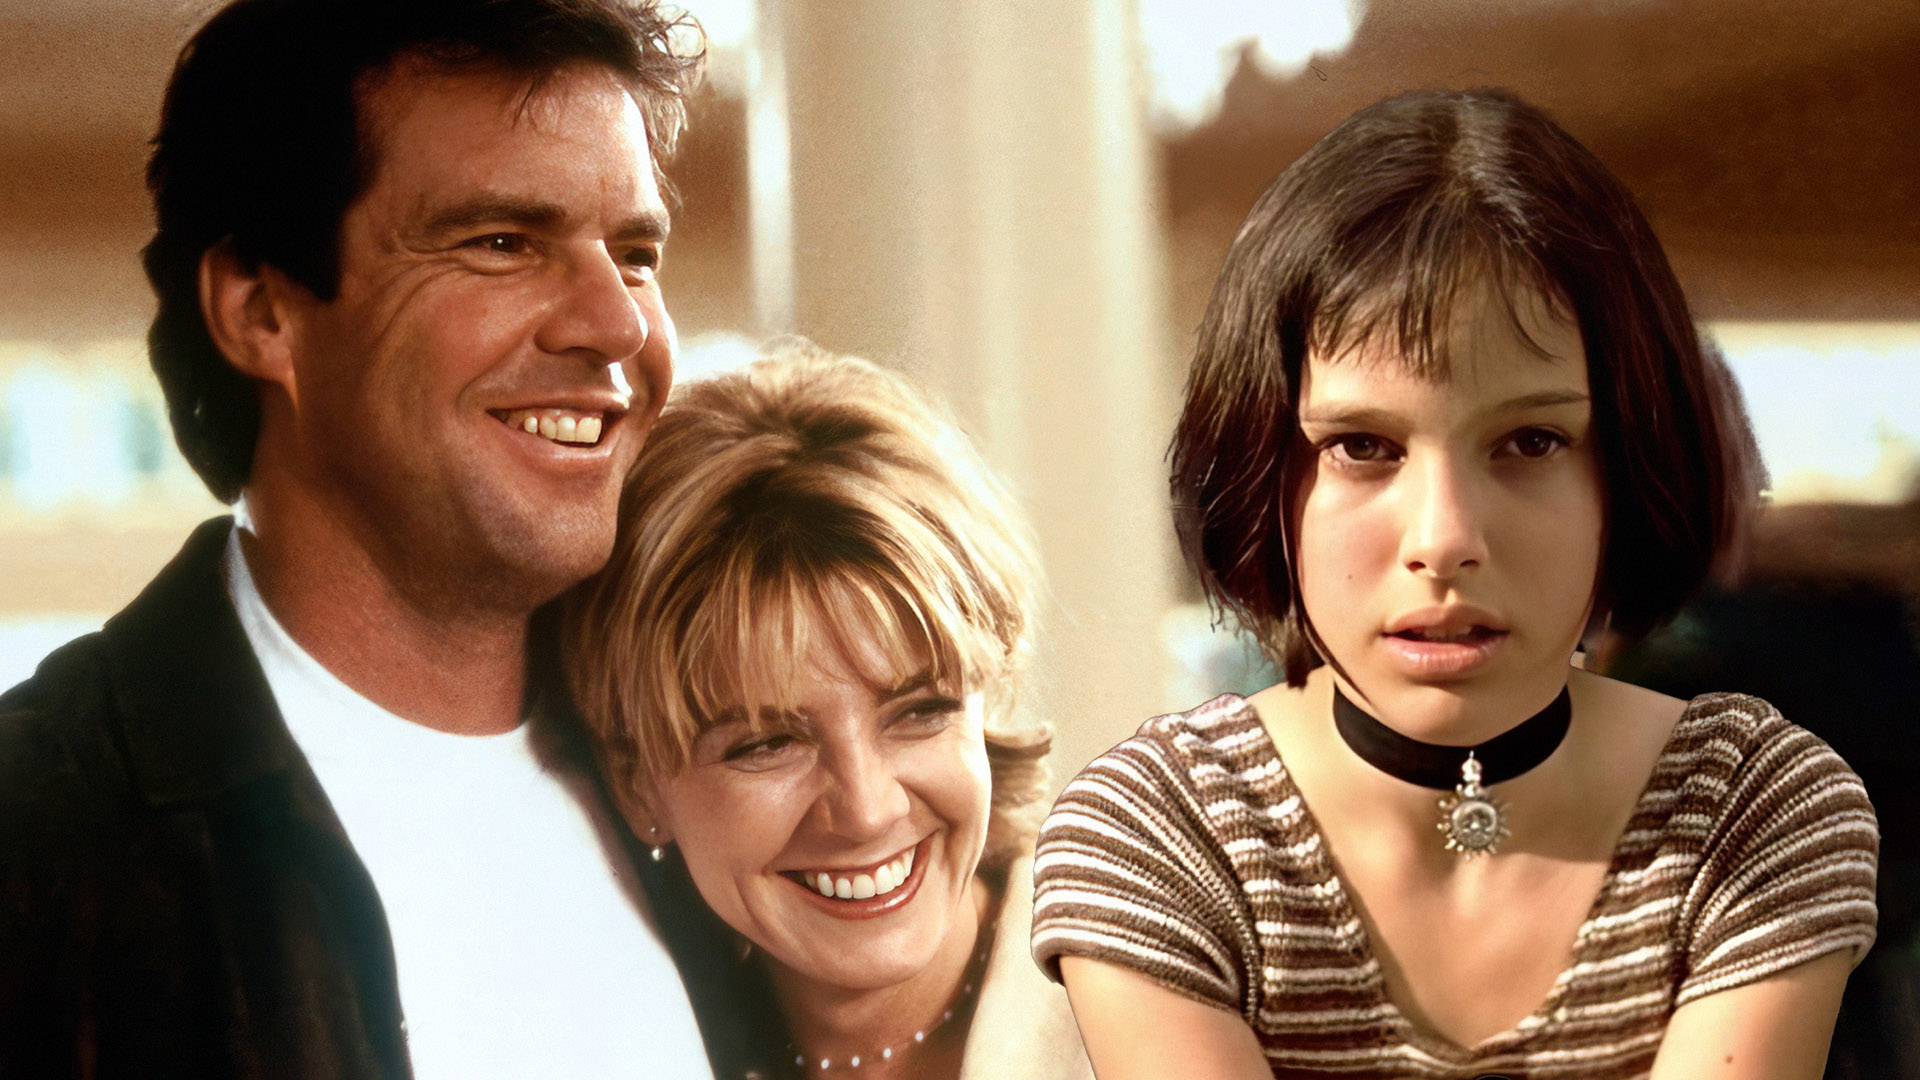 Tastes Change: 5 Once-Beloved Movies That You See Differently as an Adult